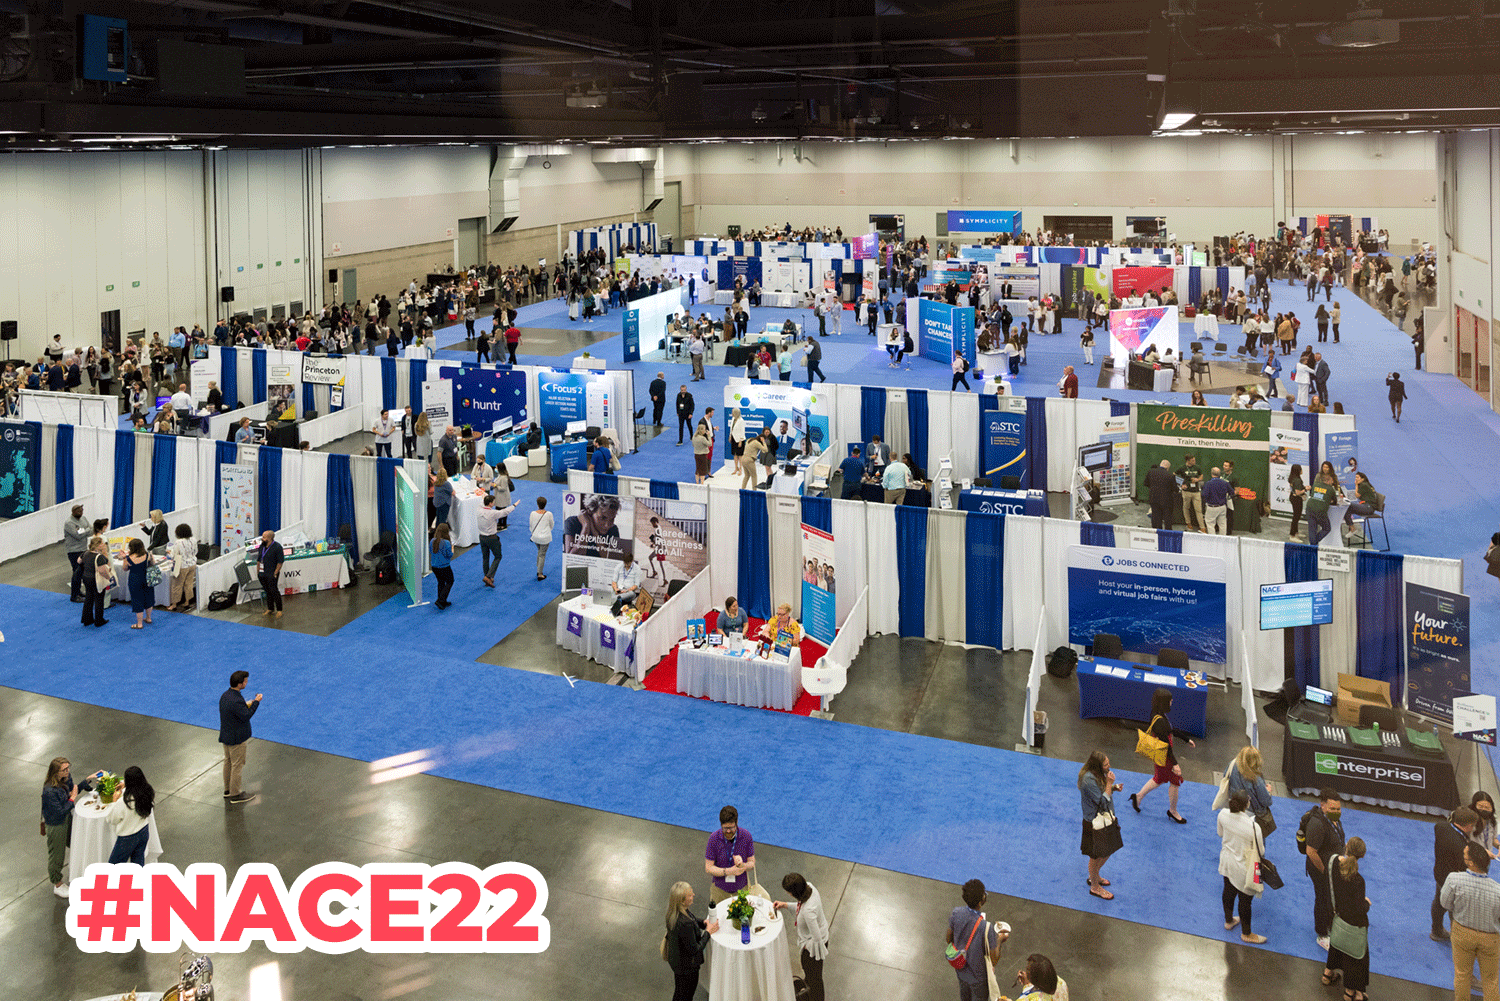 2023 NACE Conference & Expo The Premier Career Services & College